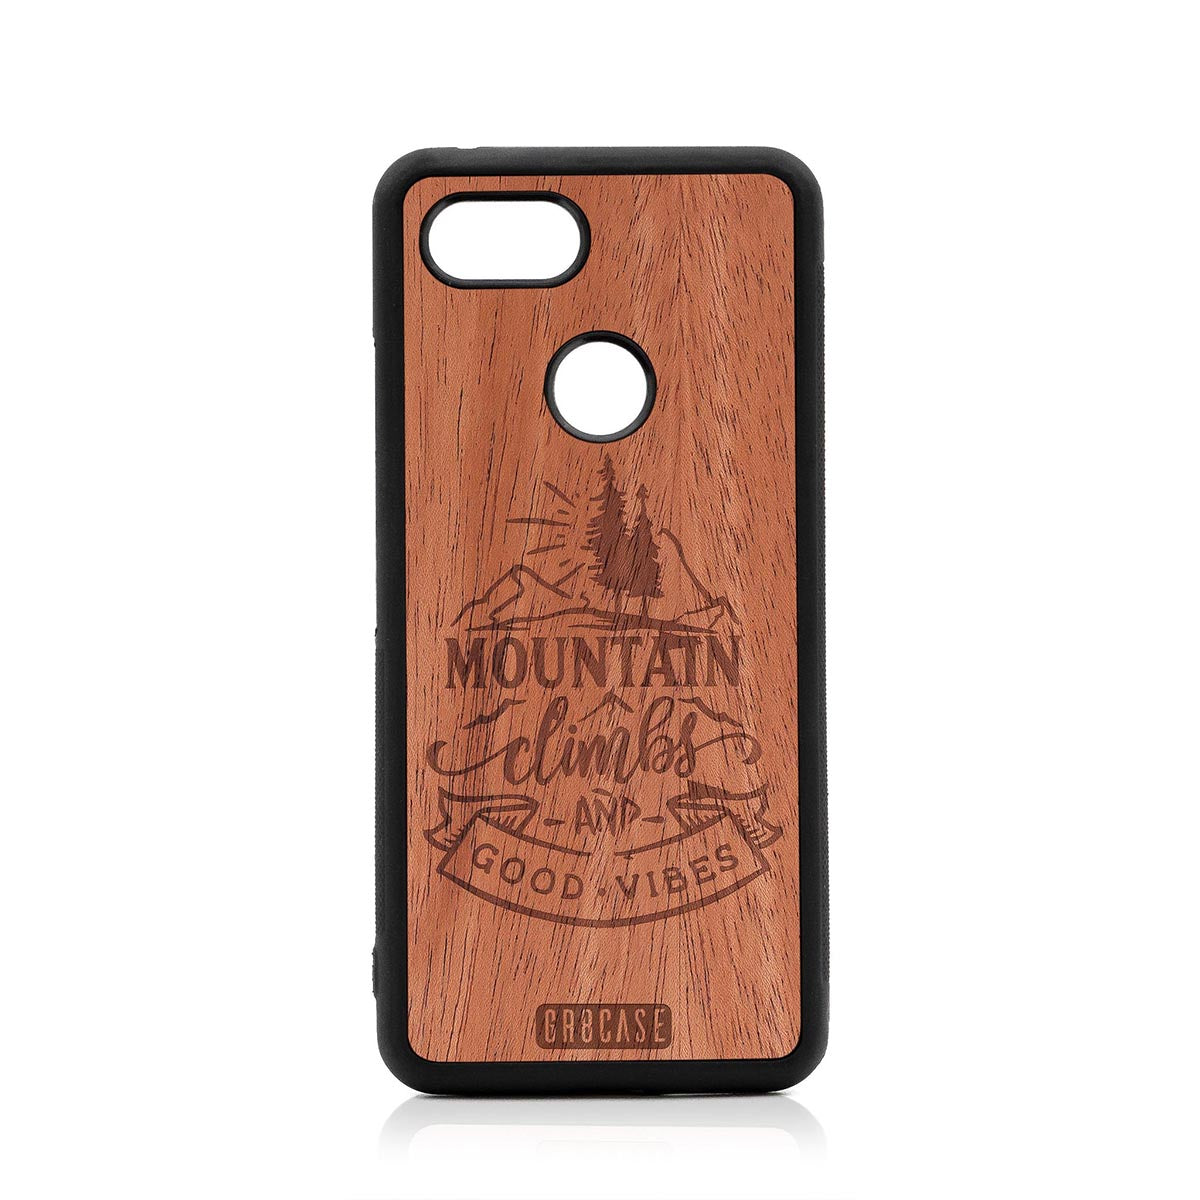 Mountain Climbs And Good Vibes Design Wood Case Google Pixel 3 by GR8CASE